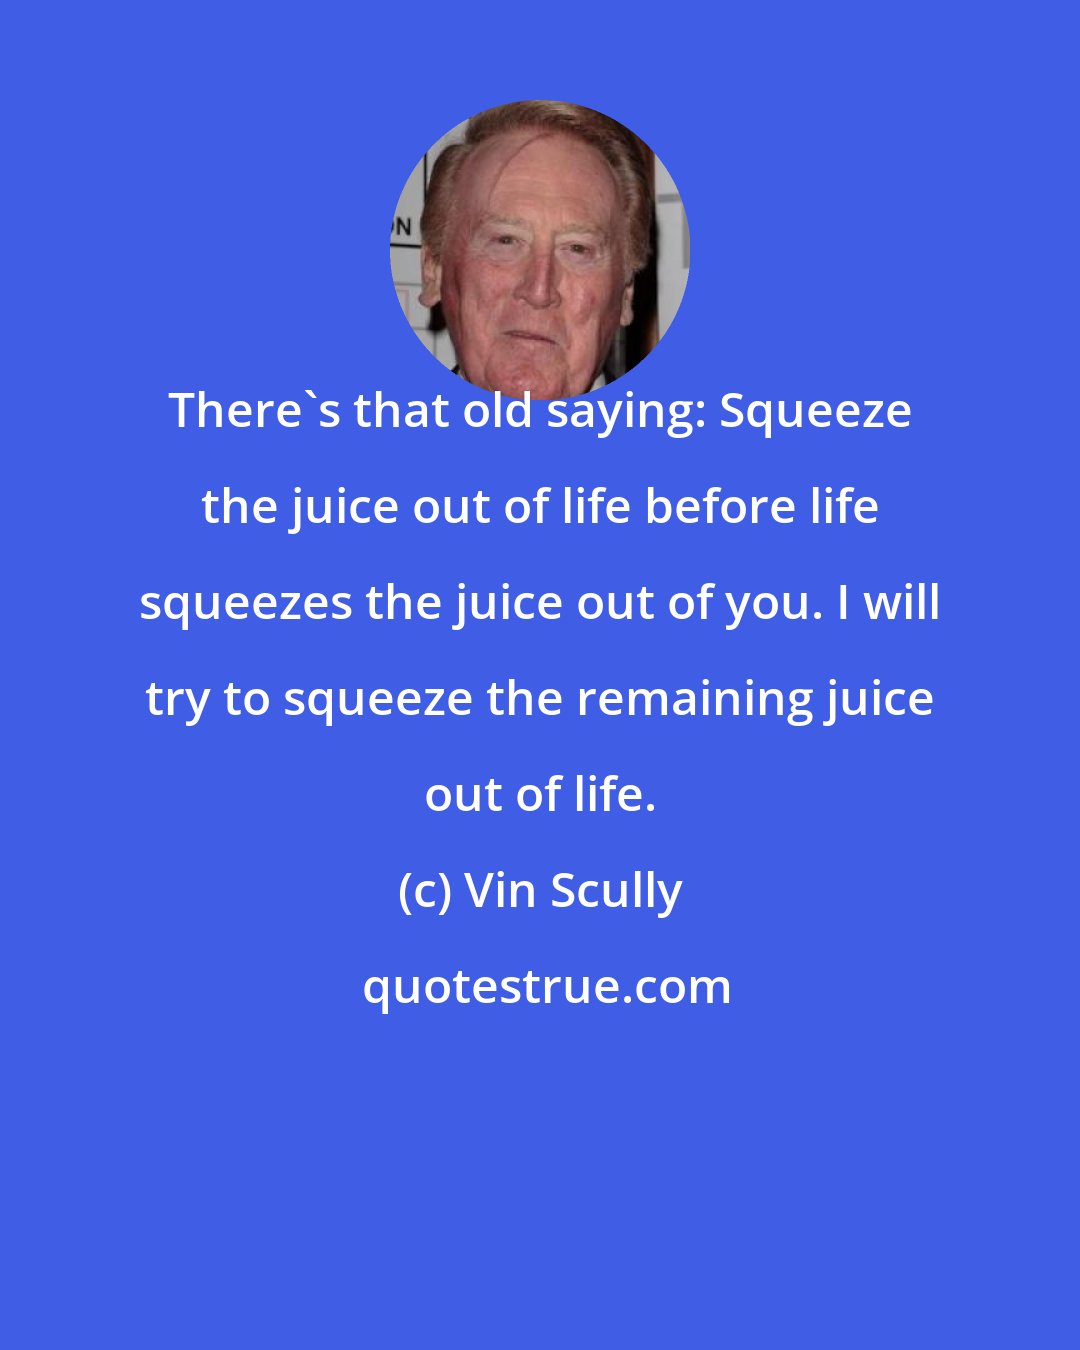 Vin Scully: There's that old saying: Squeeze the juice out of life before life squeezes the juice out of you. I will try to squeeze the remaining juice out of life.